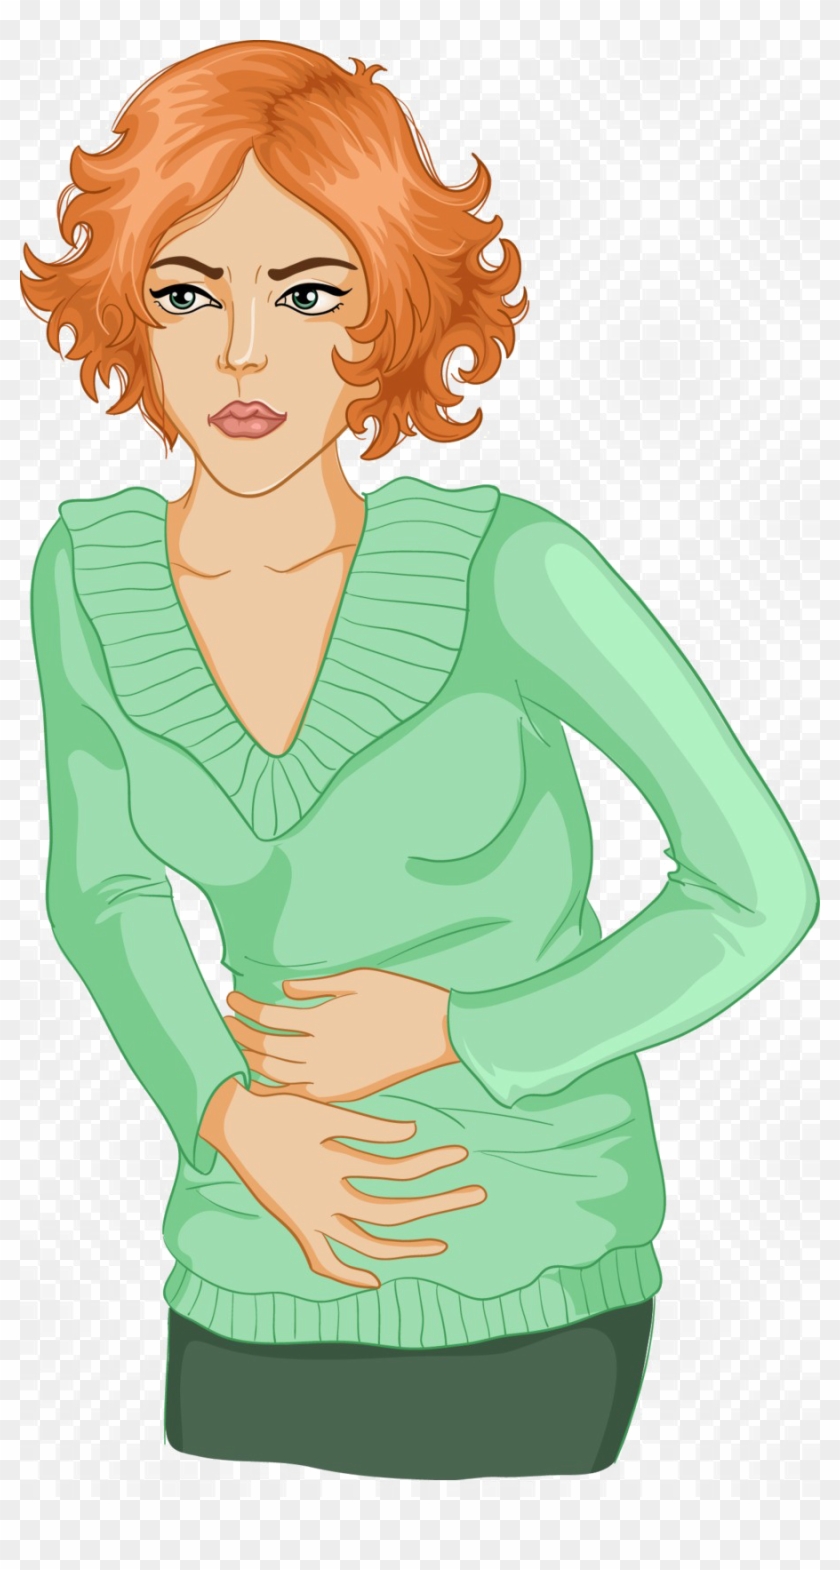 Pain In Stomach Transparent Background - Girl Stomach Ache Clipart - Png Download #1856513